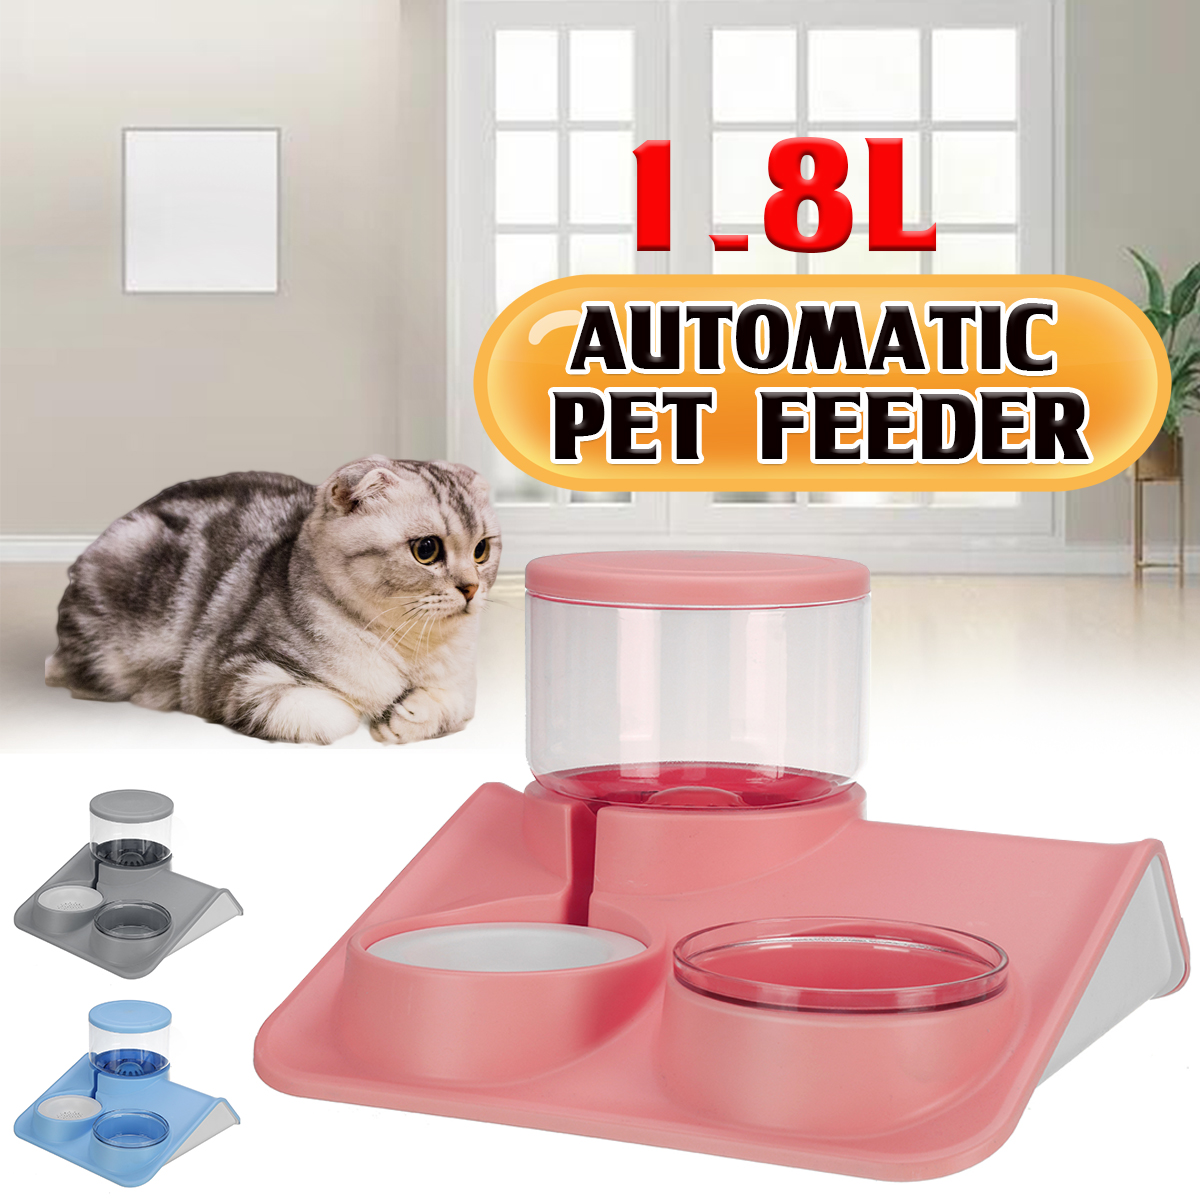 Pet-Waterer-Multi-Layer-Filter-Sealed-Cat-Bowl-2L-Pet-Bowl-for-Automatic-Cat-Drinking-and-Feeding-De-1912352-2